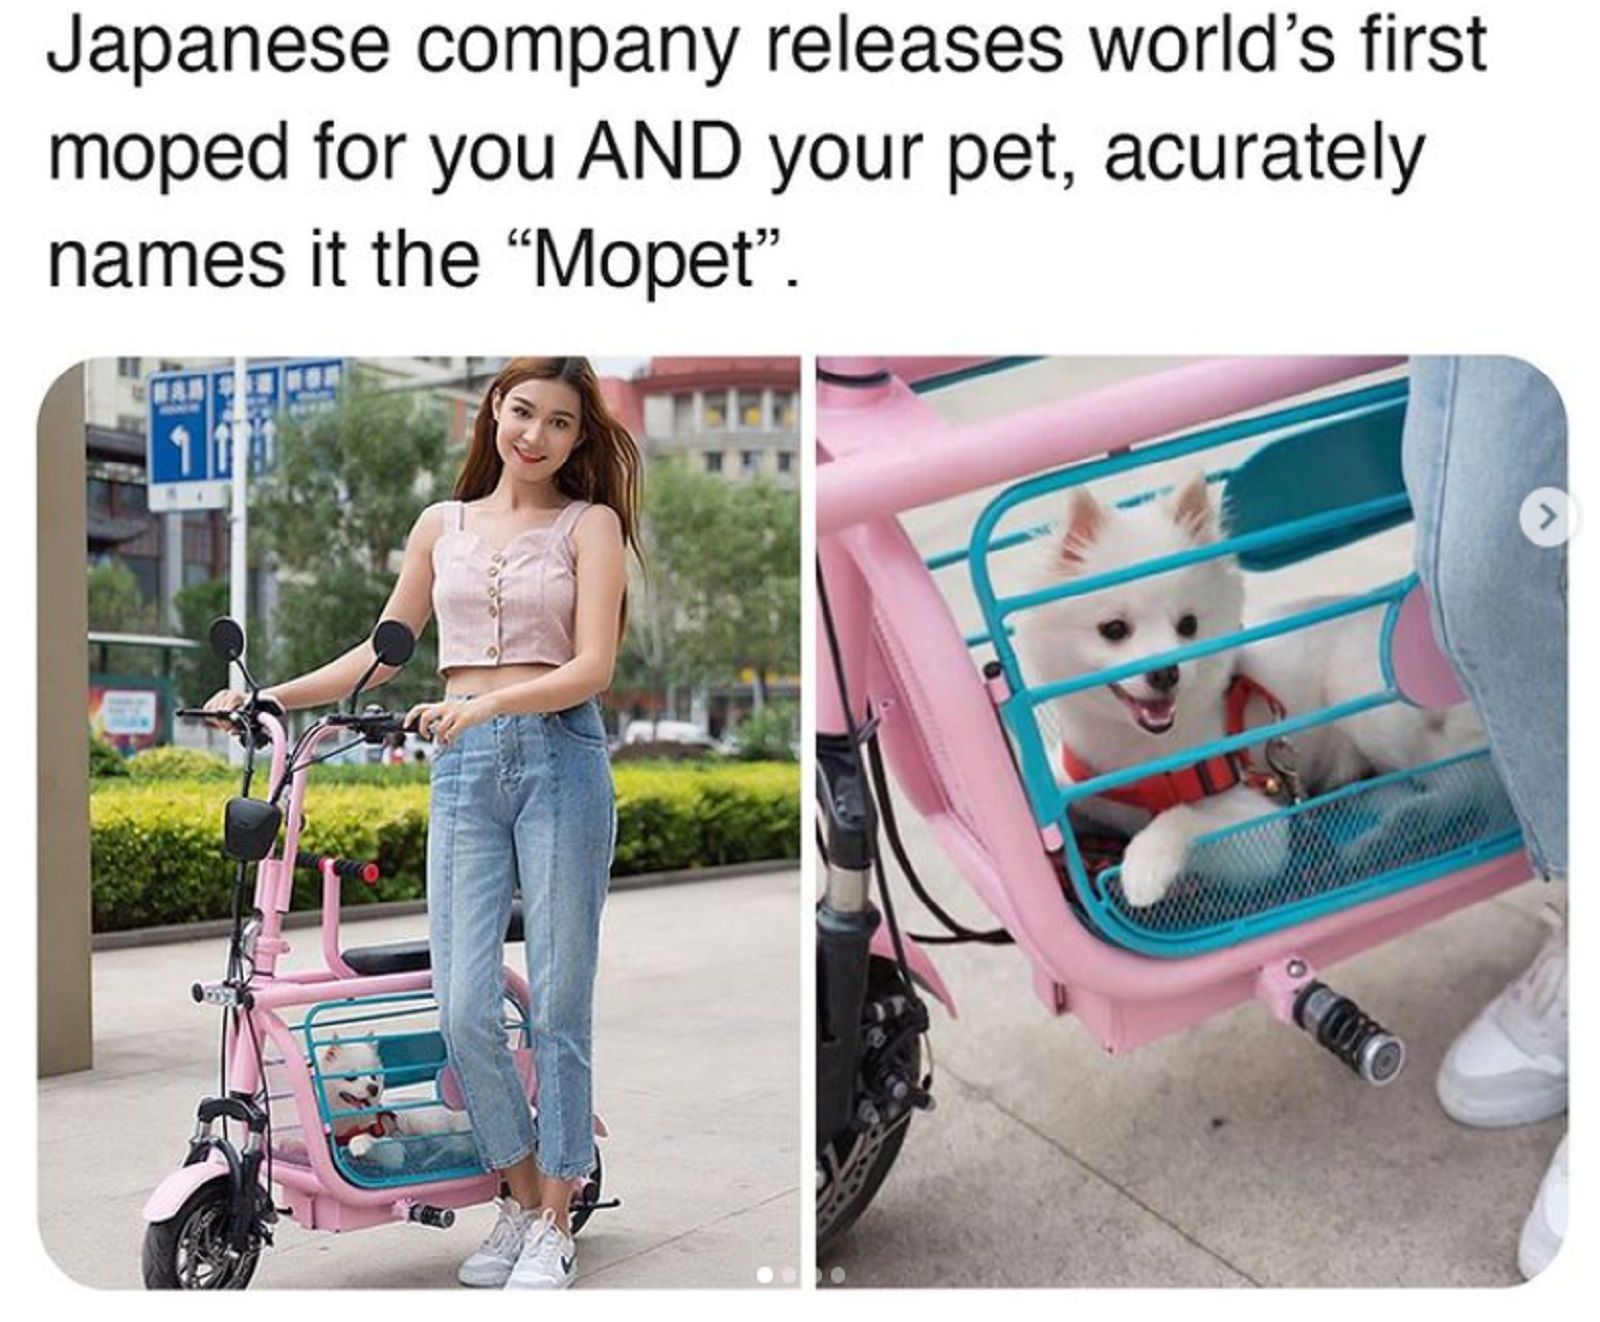 worlds first moped